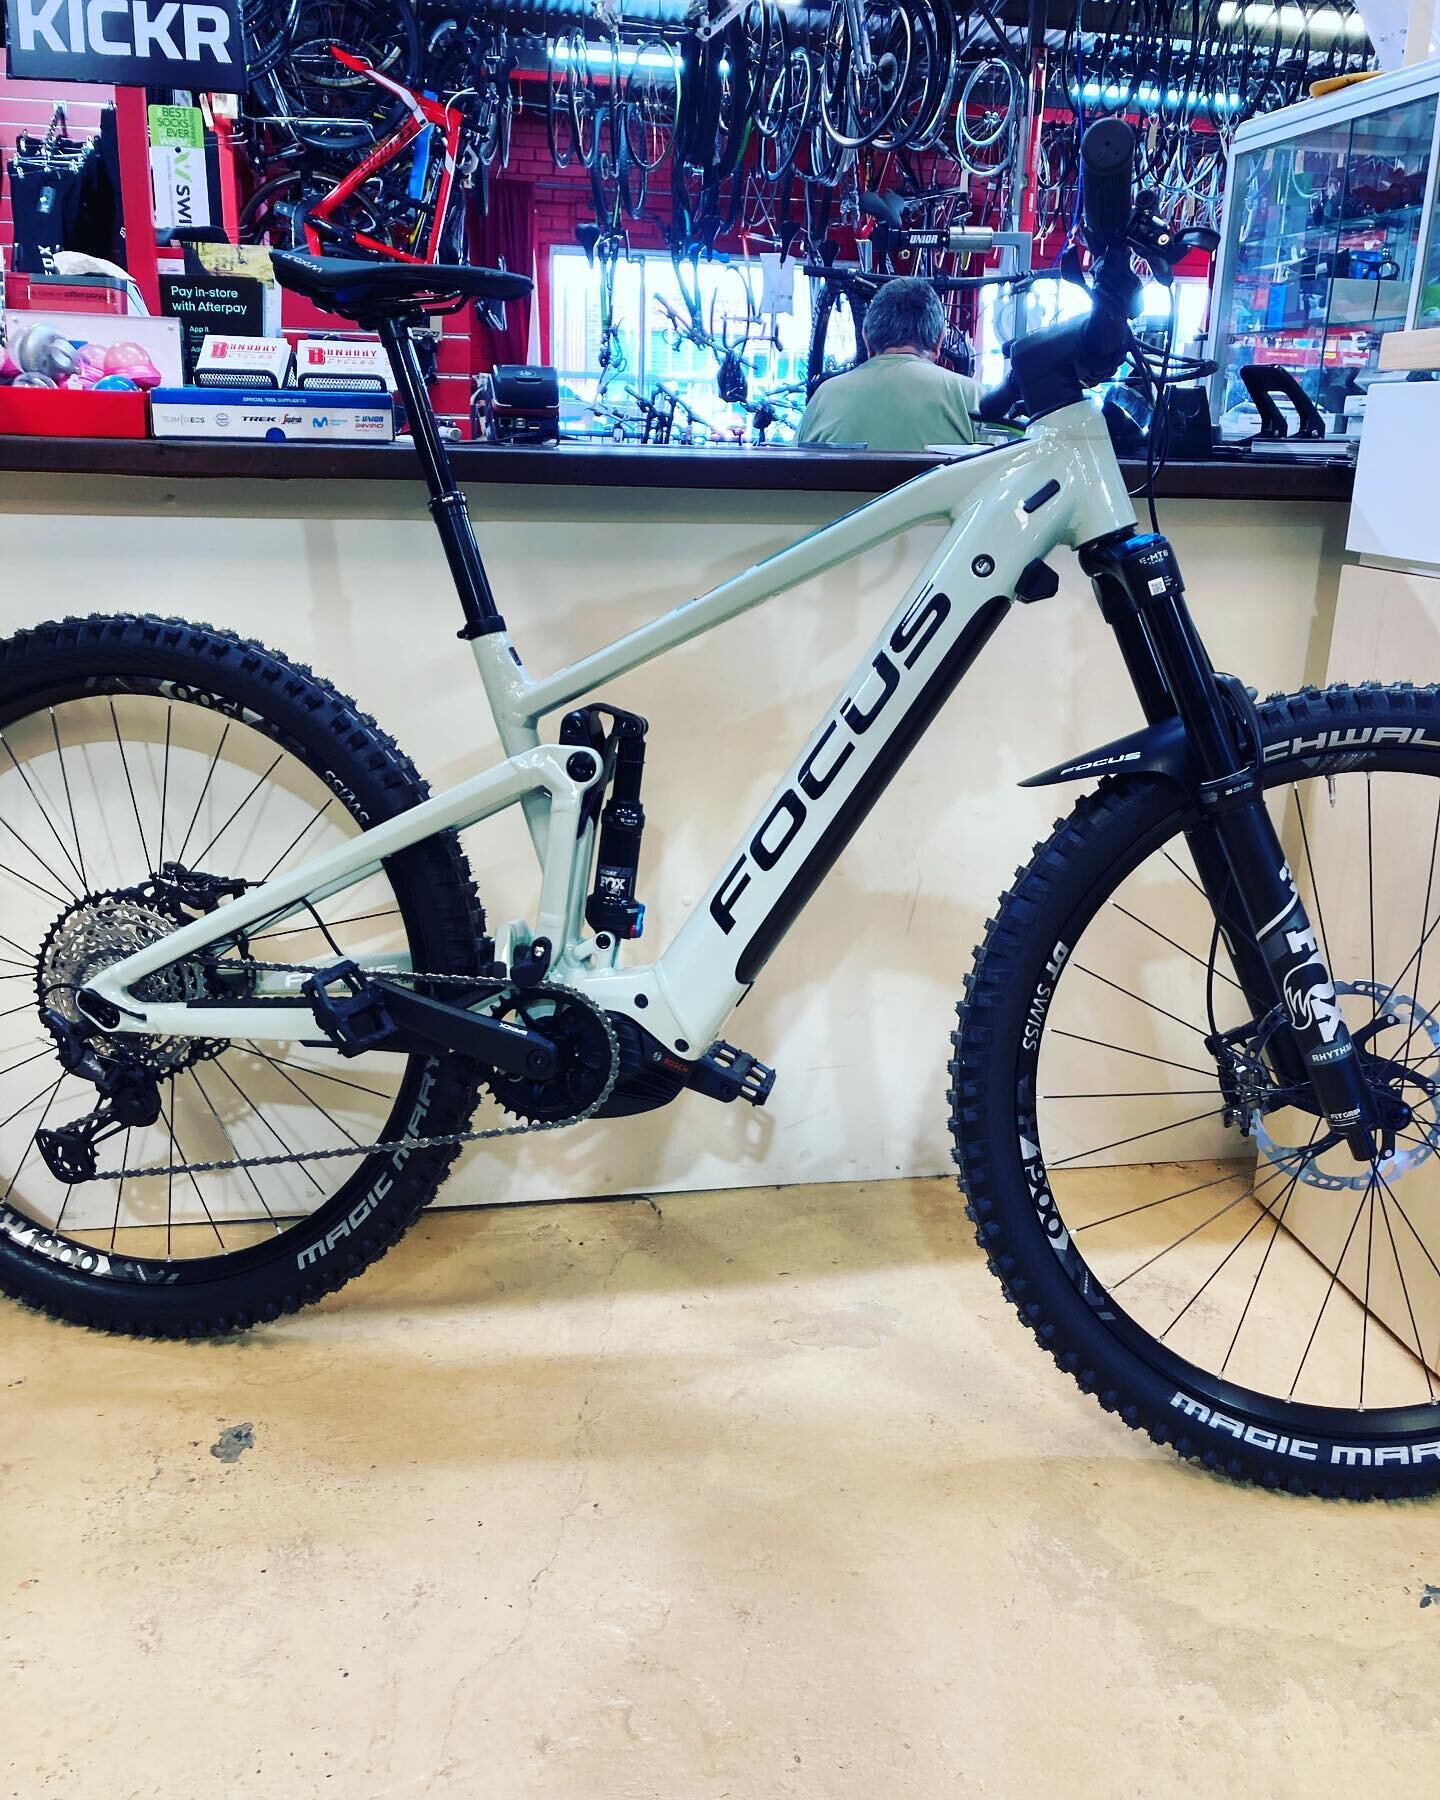 New stock arrival
One only Focus Jam 2 6.9 E-MTB size medium

Bosch Performance CX motor with 625WH battery. 
Shimano XT drive chain and 4-pot brakes. 
Fox suspension and DT Swiss H1900 wheels. 
$9199
#focusbikes #focusmtb #focusebike #focusjam2 #rid